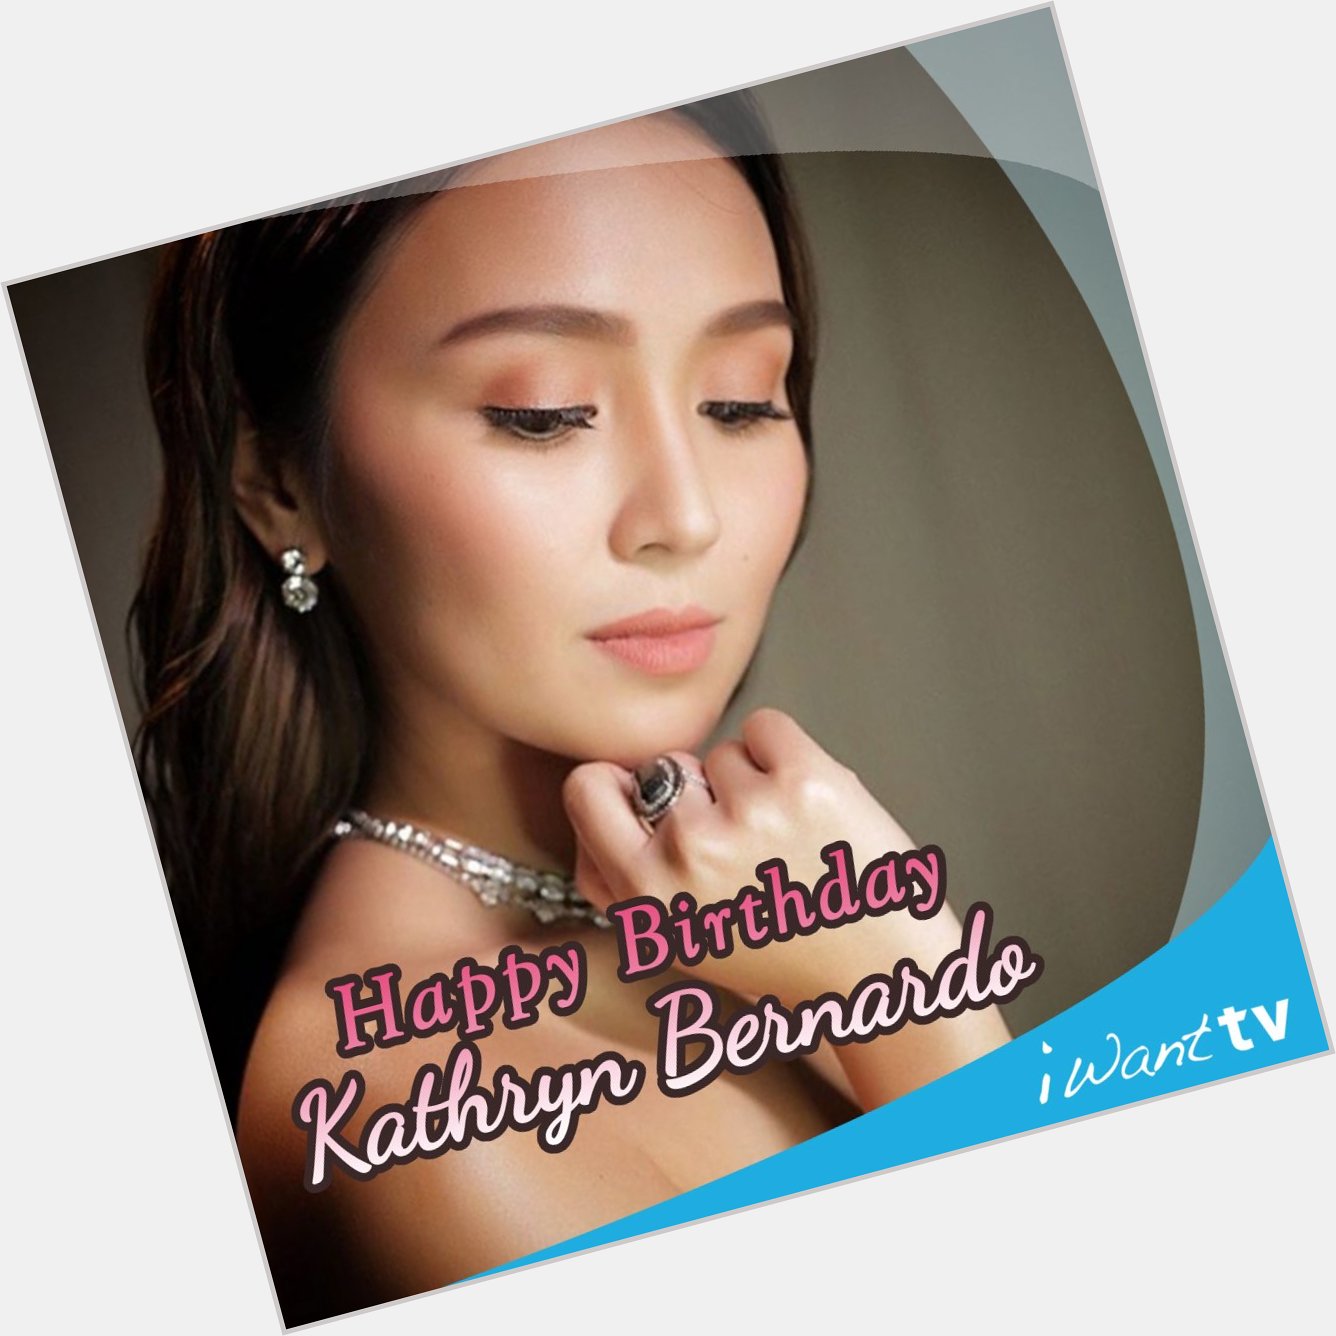 Happy birthday to the one and only Queen of Hearts, Kathryn Bernardo!  